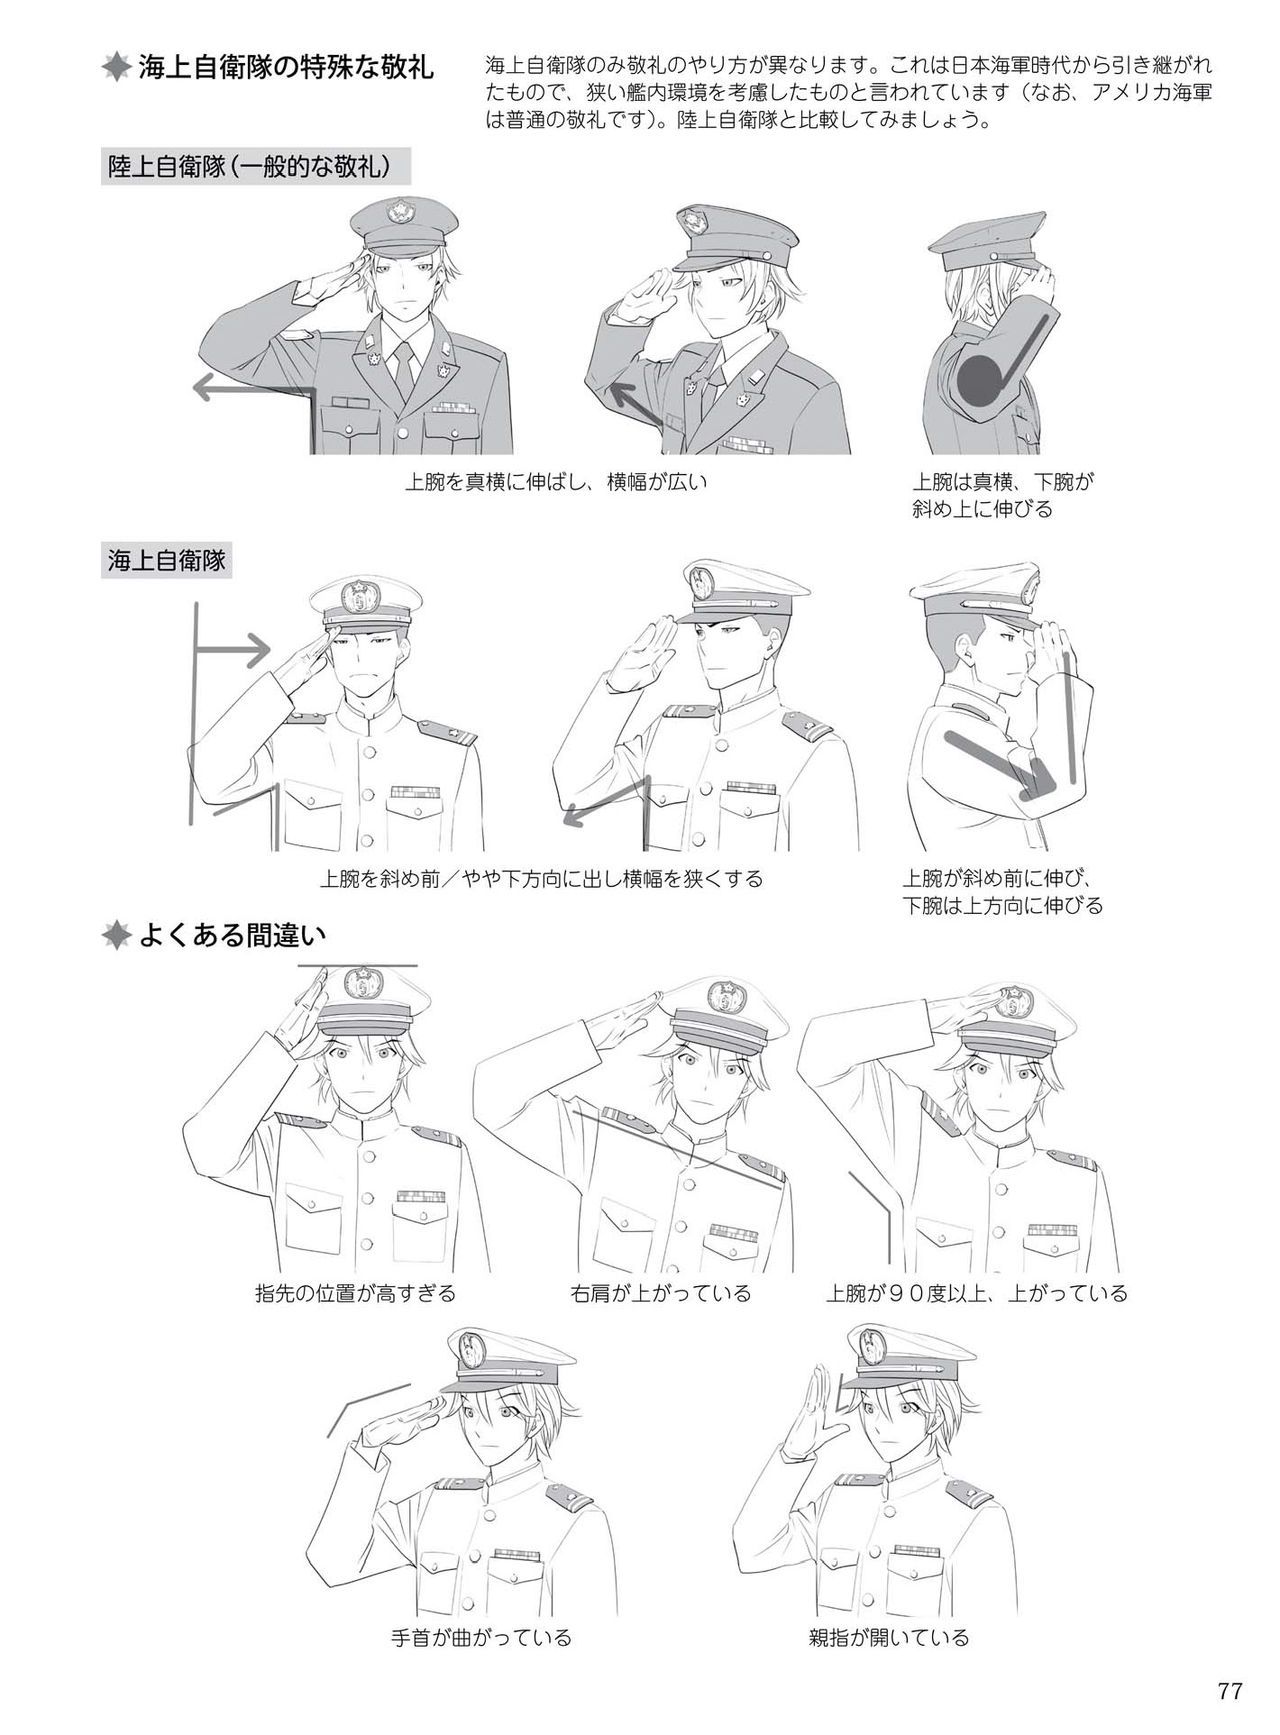 How to draw military uniforms and uniforms From Self-Defense Forces 軍服・制服の描き方 アメリカ軍・自衛隊の制服から戦闘服まで 80